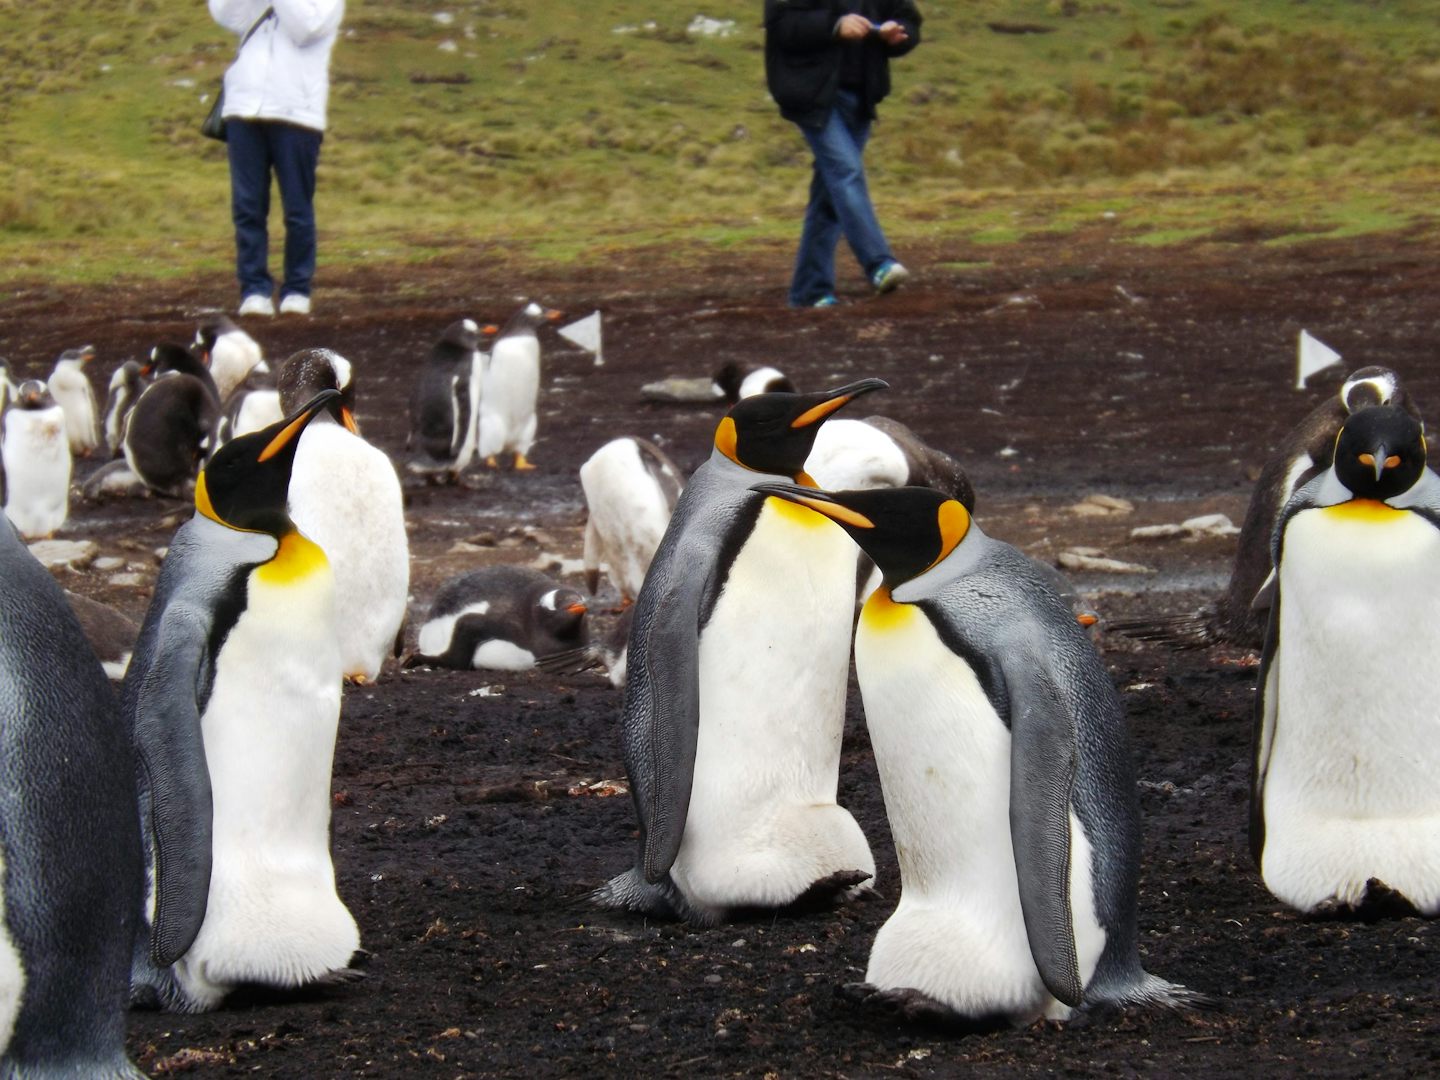 King Penguins at  Bluff Cove in the Falkland Islands. This is one of the be